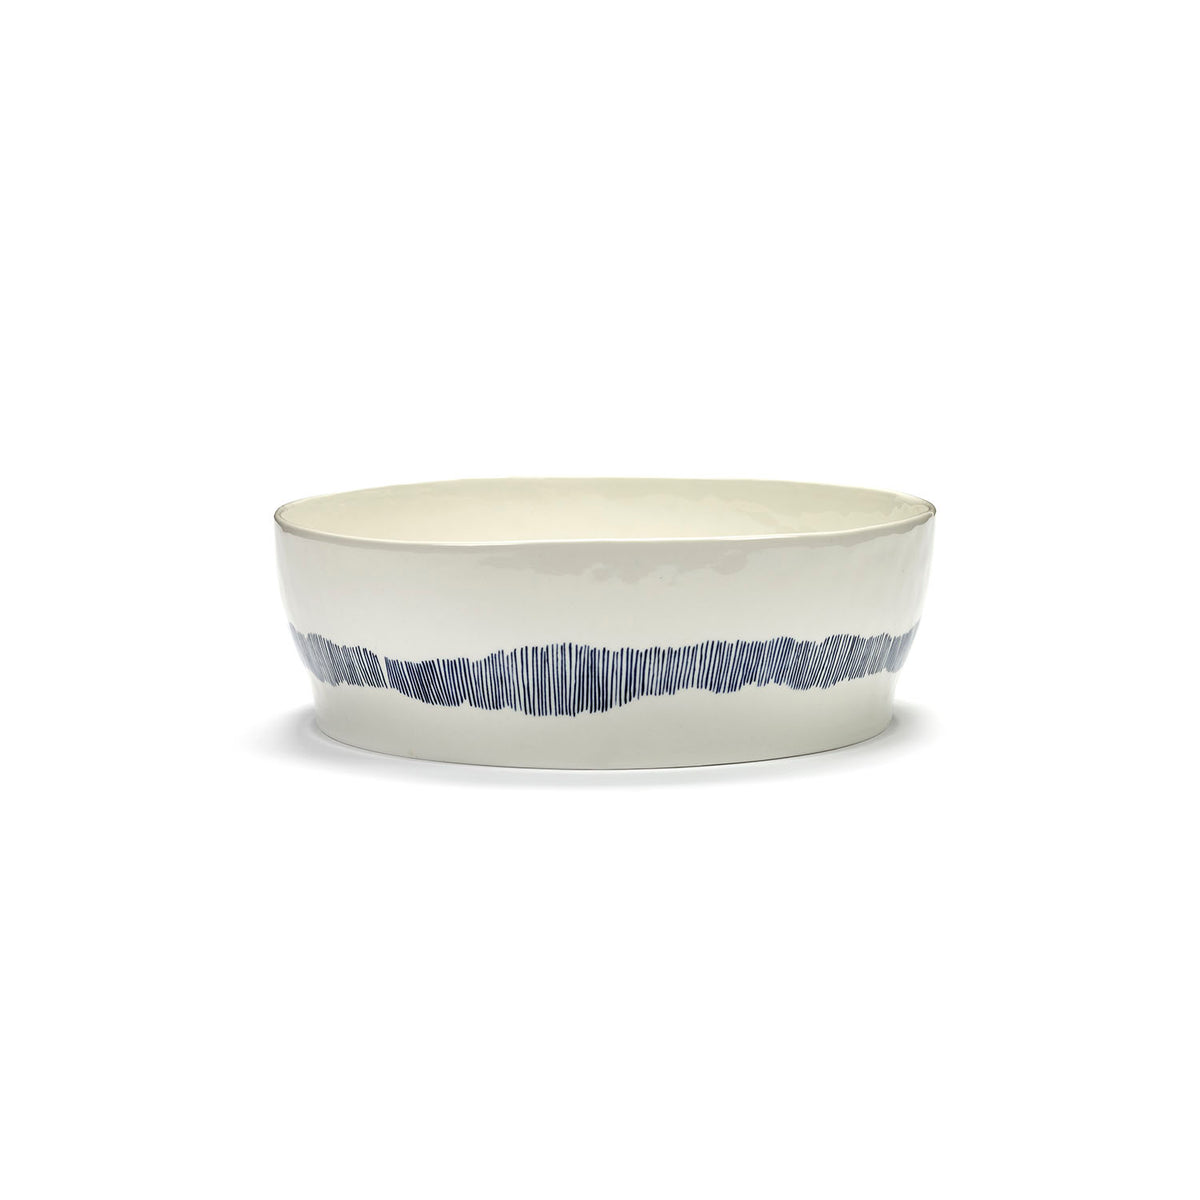 Ottolenghi for Serax Feast collection, side view of salad bowl, with white swirl-stripes blue design.